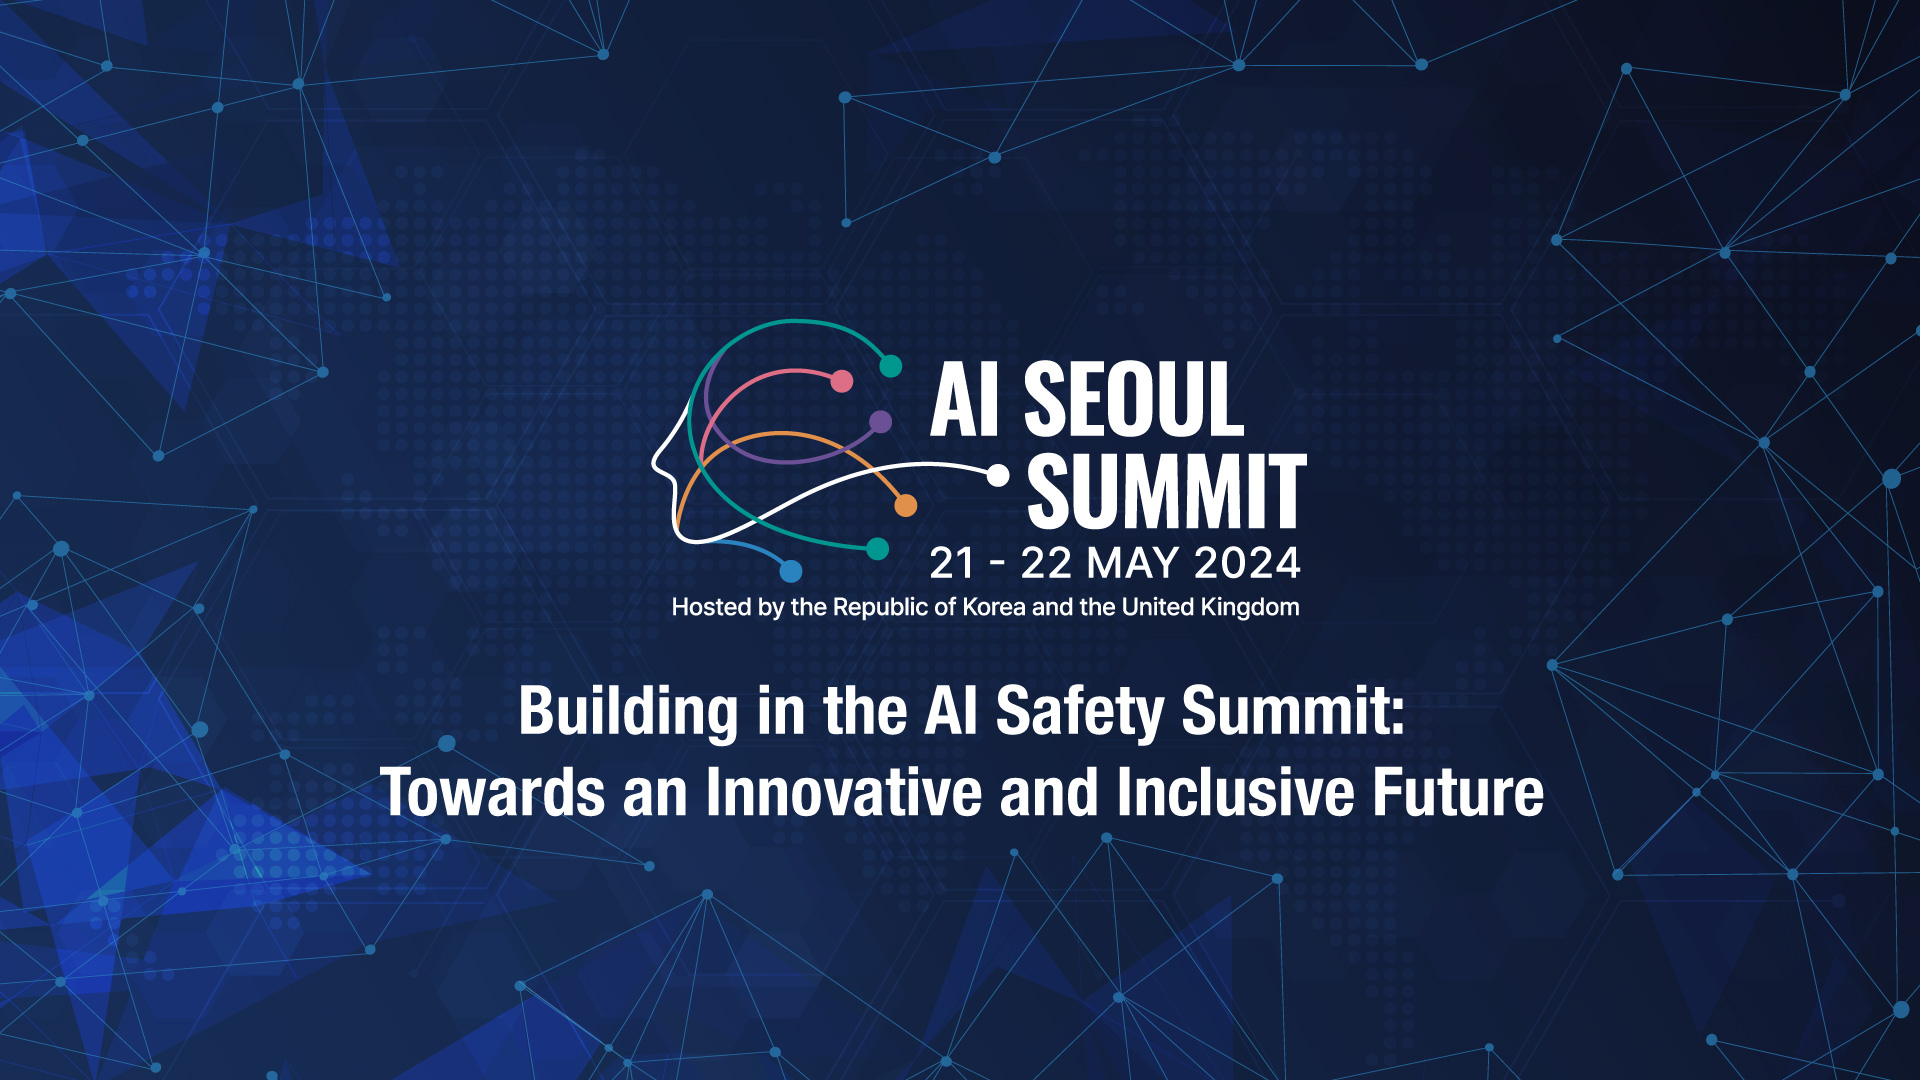 &lt;!-- Not Allowed Tag Filtered --&gt;&lt;Event Overview&gt;Event Name: AI Seoul SummitDates: May 21 (Tuesday) to May 22 (Wednesday), 2024Hosts: Government of the Republic of Korea, Government of the United KingdomTheme: Based on the AI Seoul Summit, towards an innovative and inclusive future